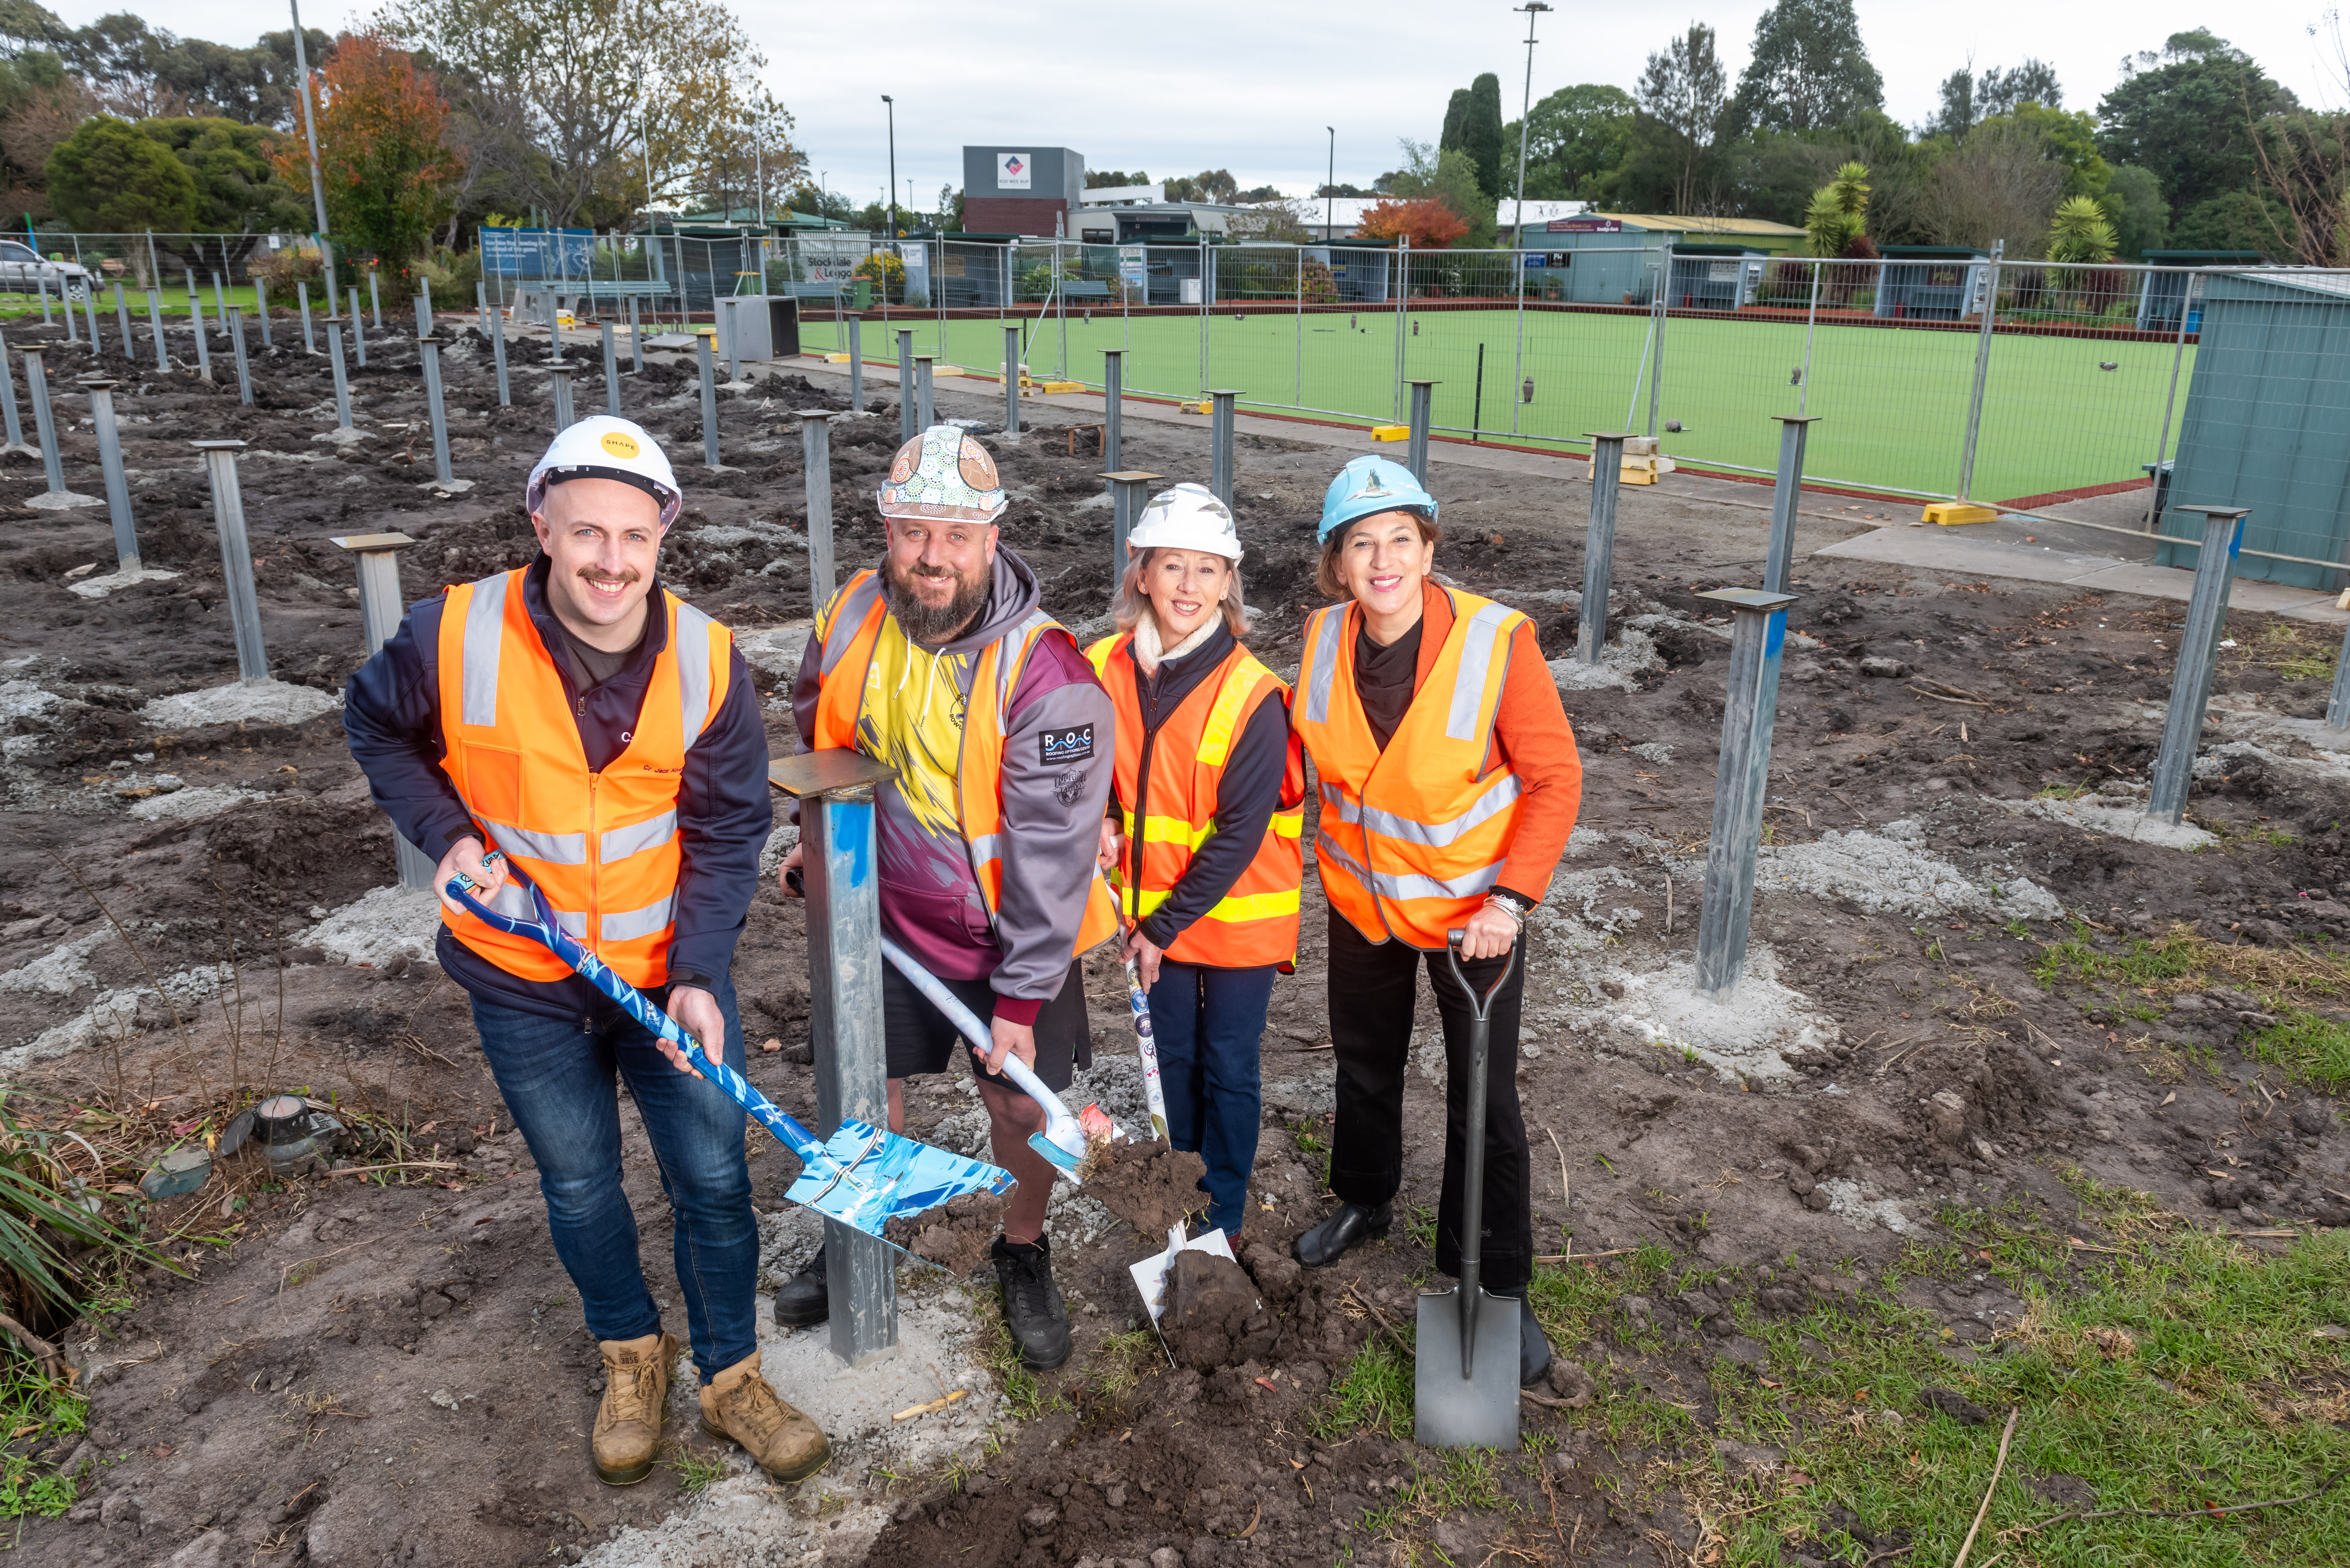 Left to right: Cardinia Shire Mayor Cr Jack Kowarzik, Koo Wee Rup Bowling Club President Tim Katz, Westernport Ward Councillor Kaye Cameron and Member for Bass Jordan Crugnale turn the sod at the Koo Wee Rup Bowling Club and Community Pavilion project.